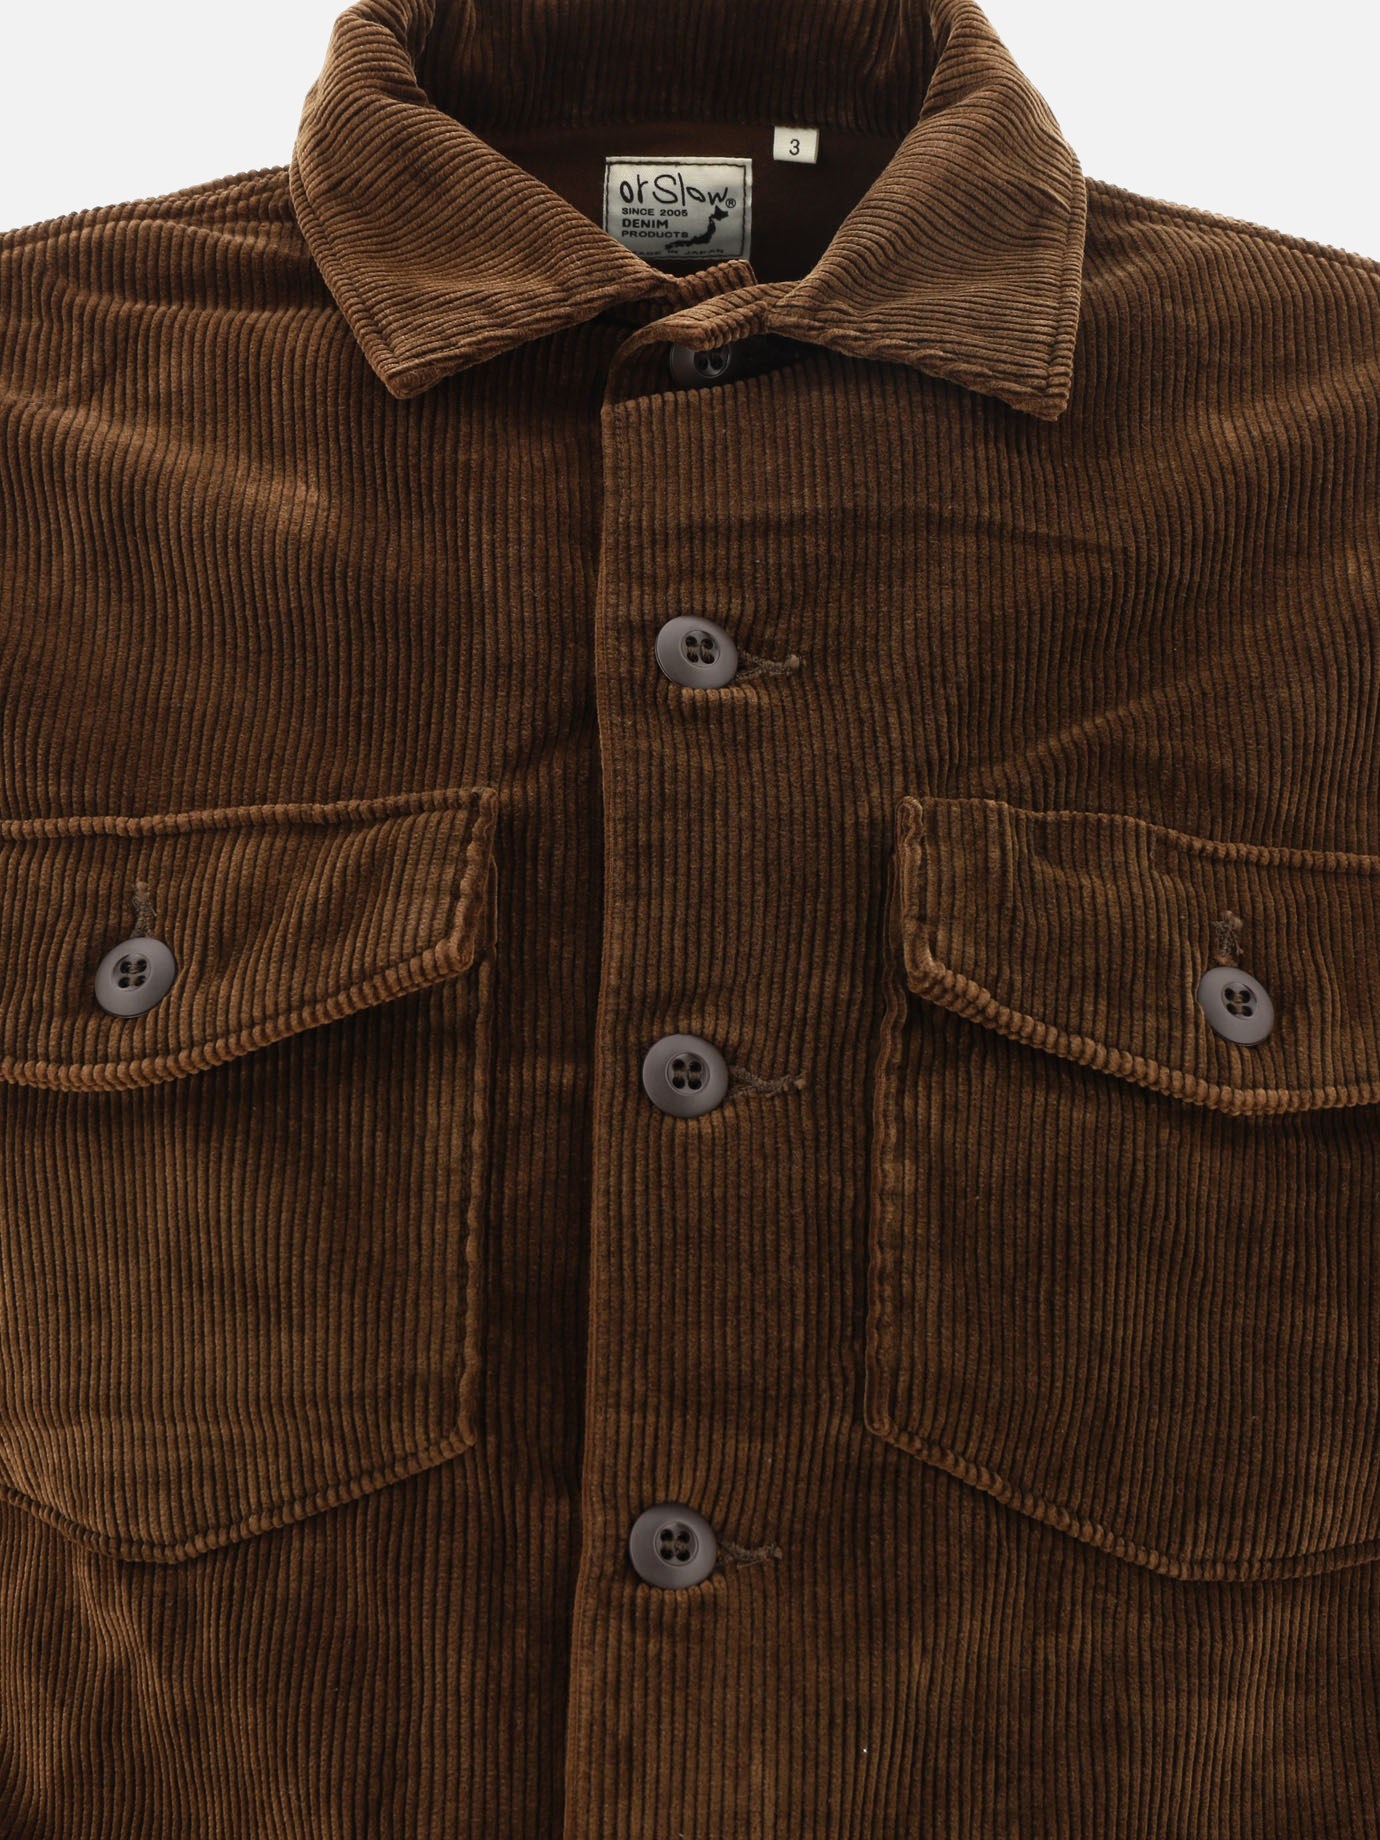 Overshirt in velluto  Cargo  by OrSlow